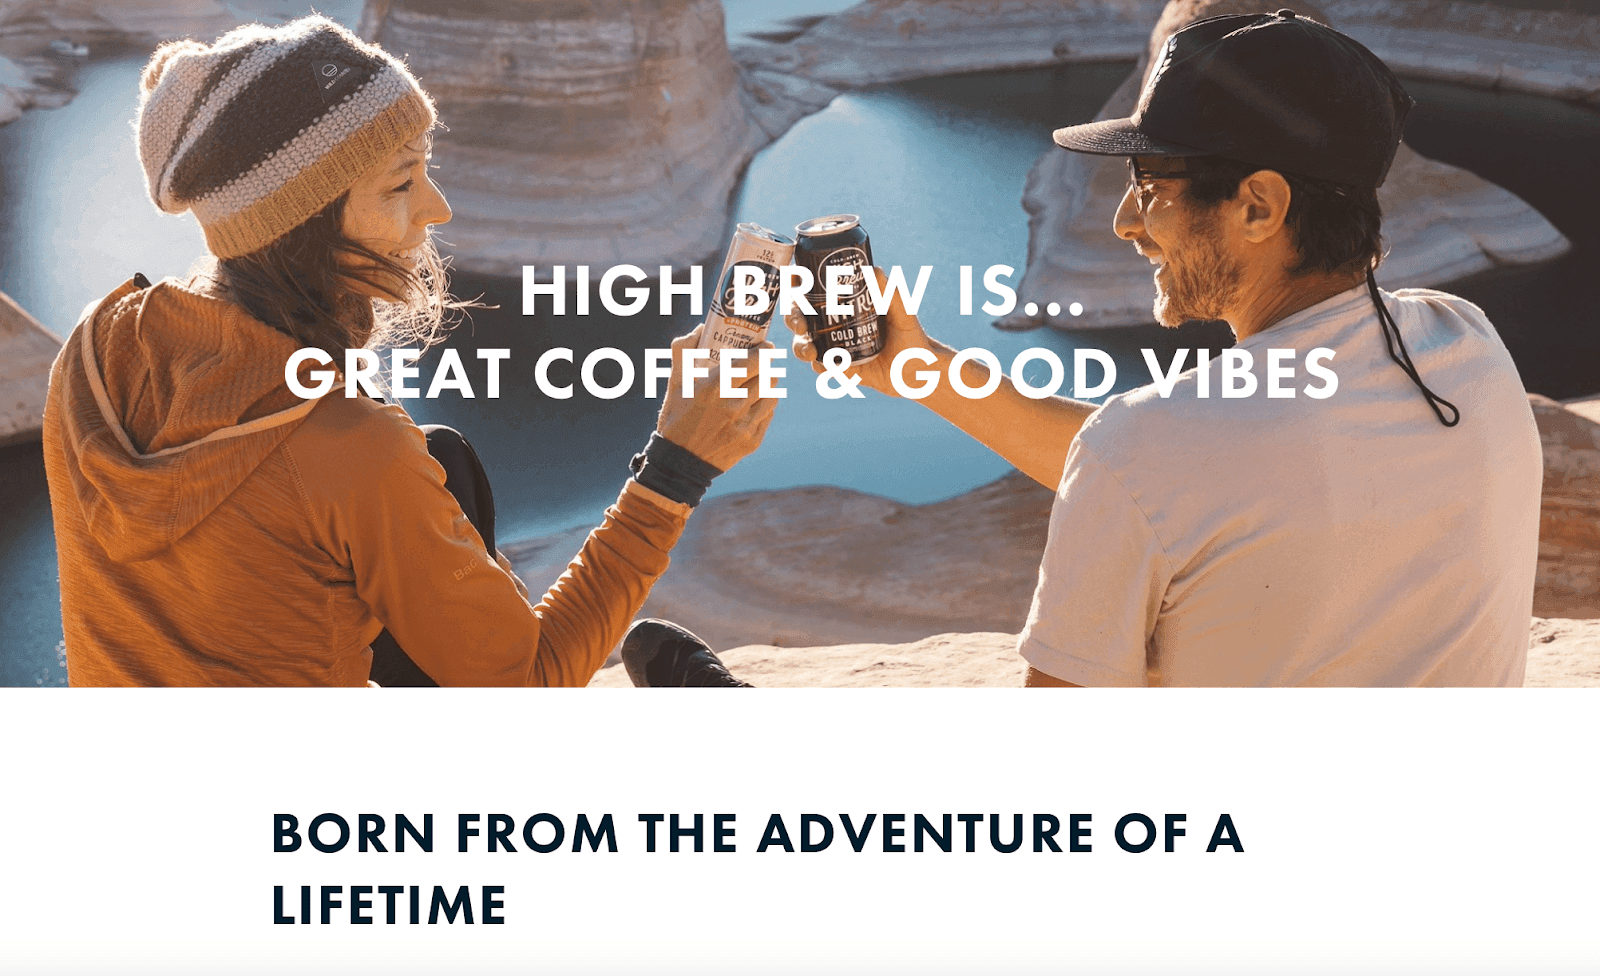 A couple drinking high brew while hiking in the mountains 